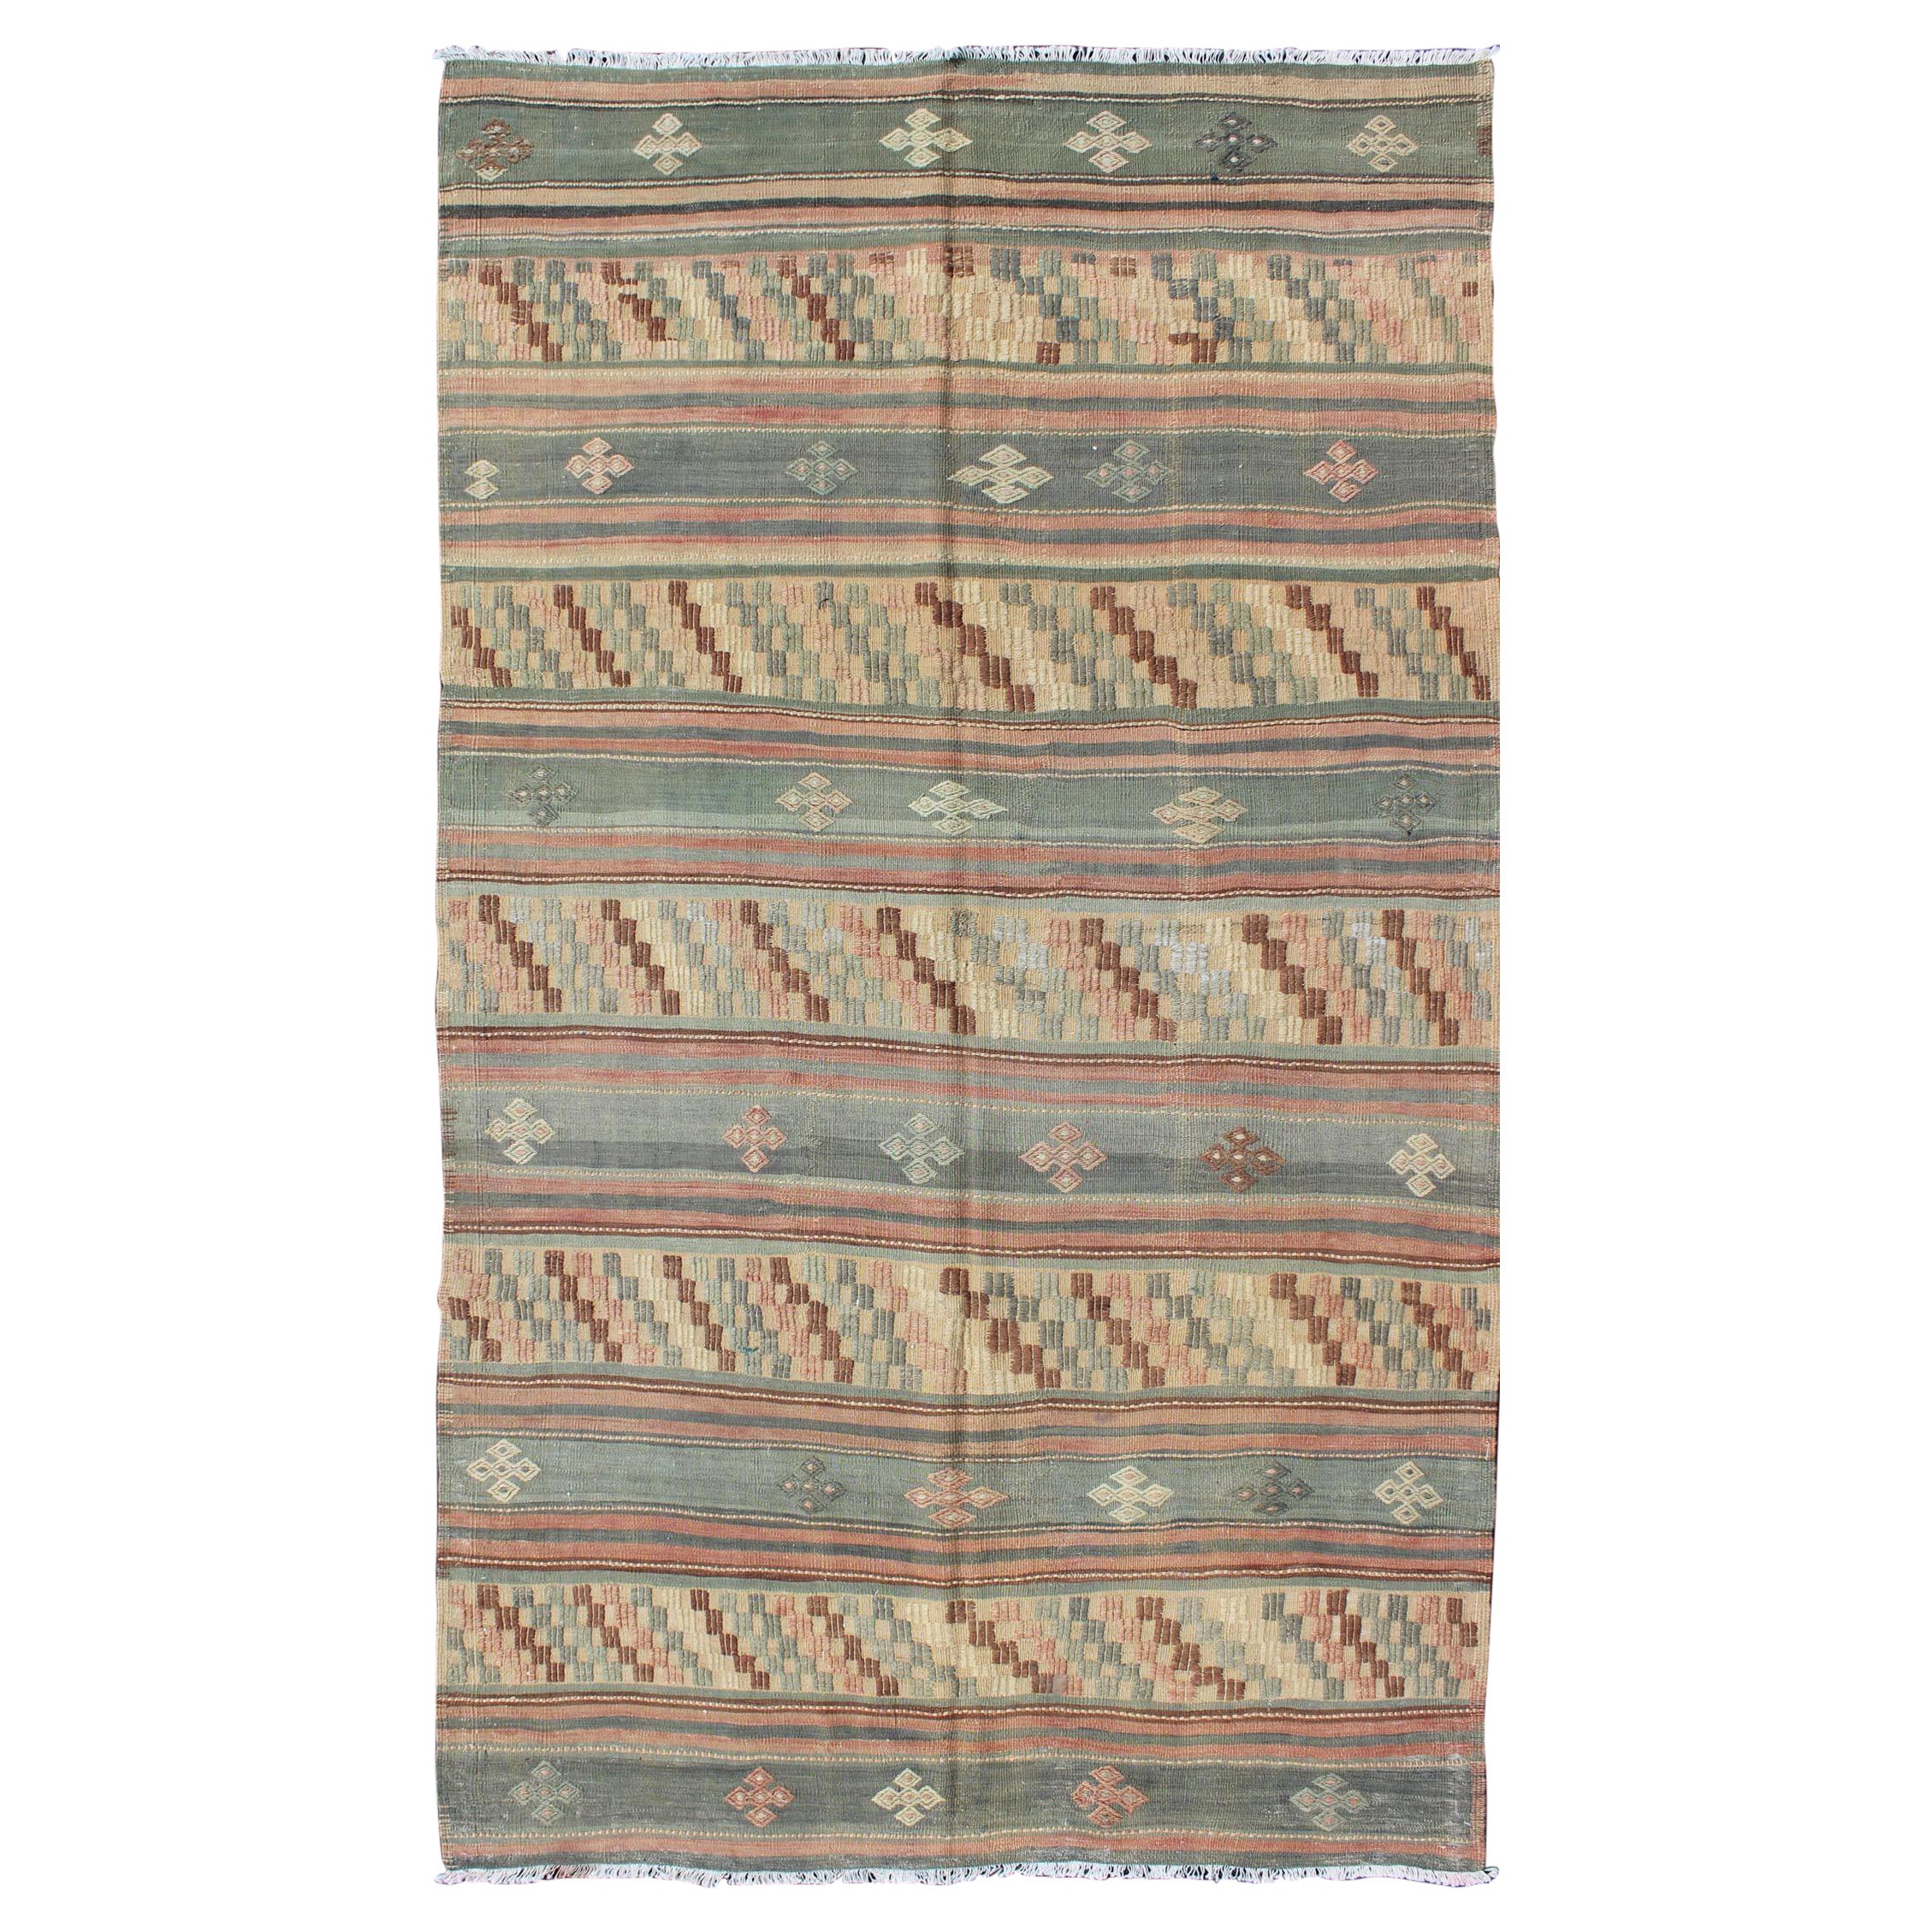 Vintage Turkish Tribal Kilim with Striped Design in Earthy Tones For Sale